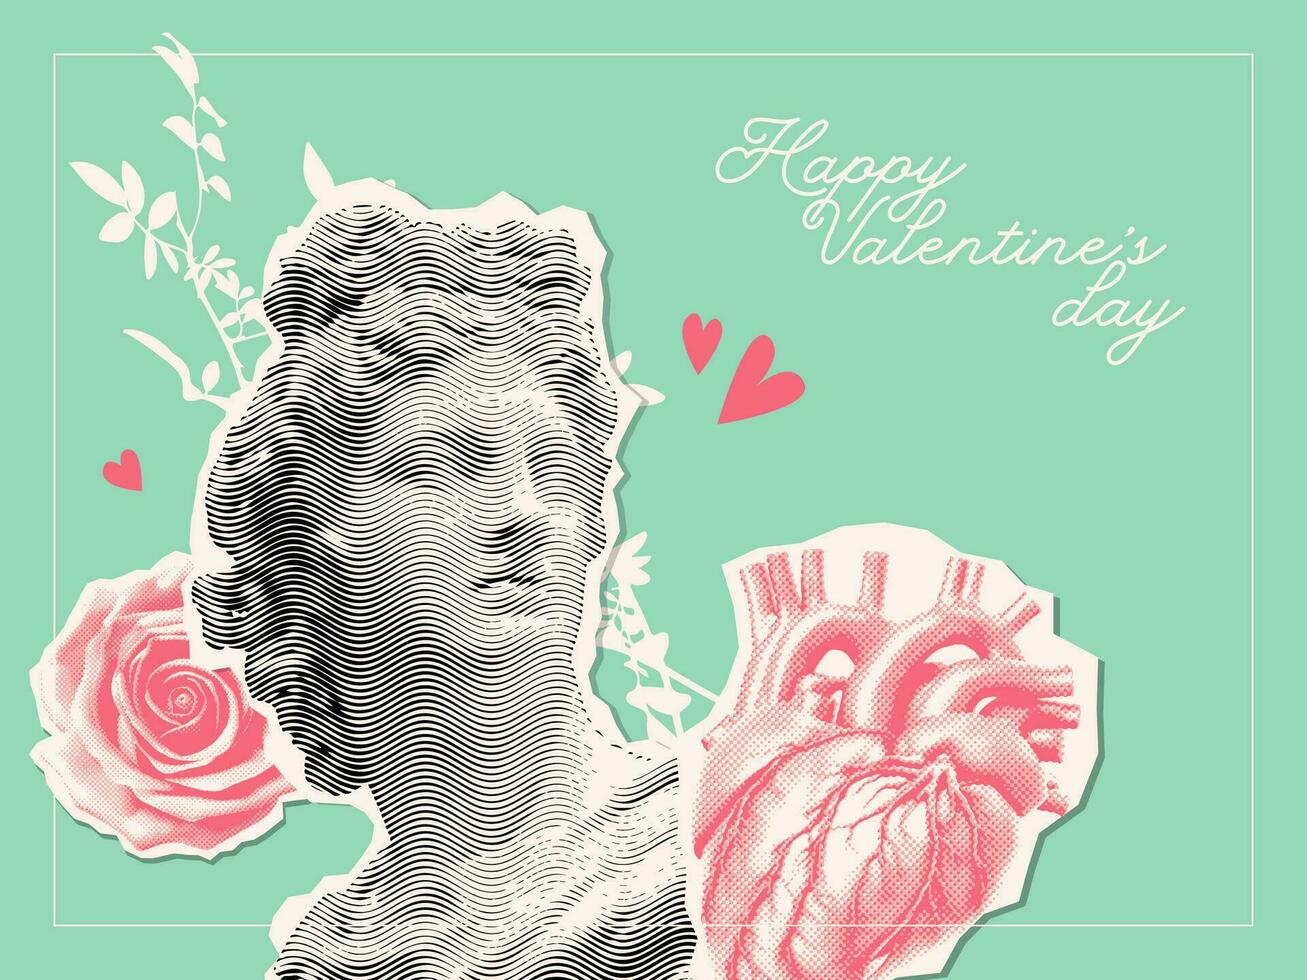 Happy Valentine's Day card in vintage paper collage style. Antique statue with halftone effect decorated by vector graphic elements of human heart and rose.